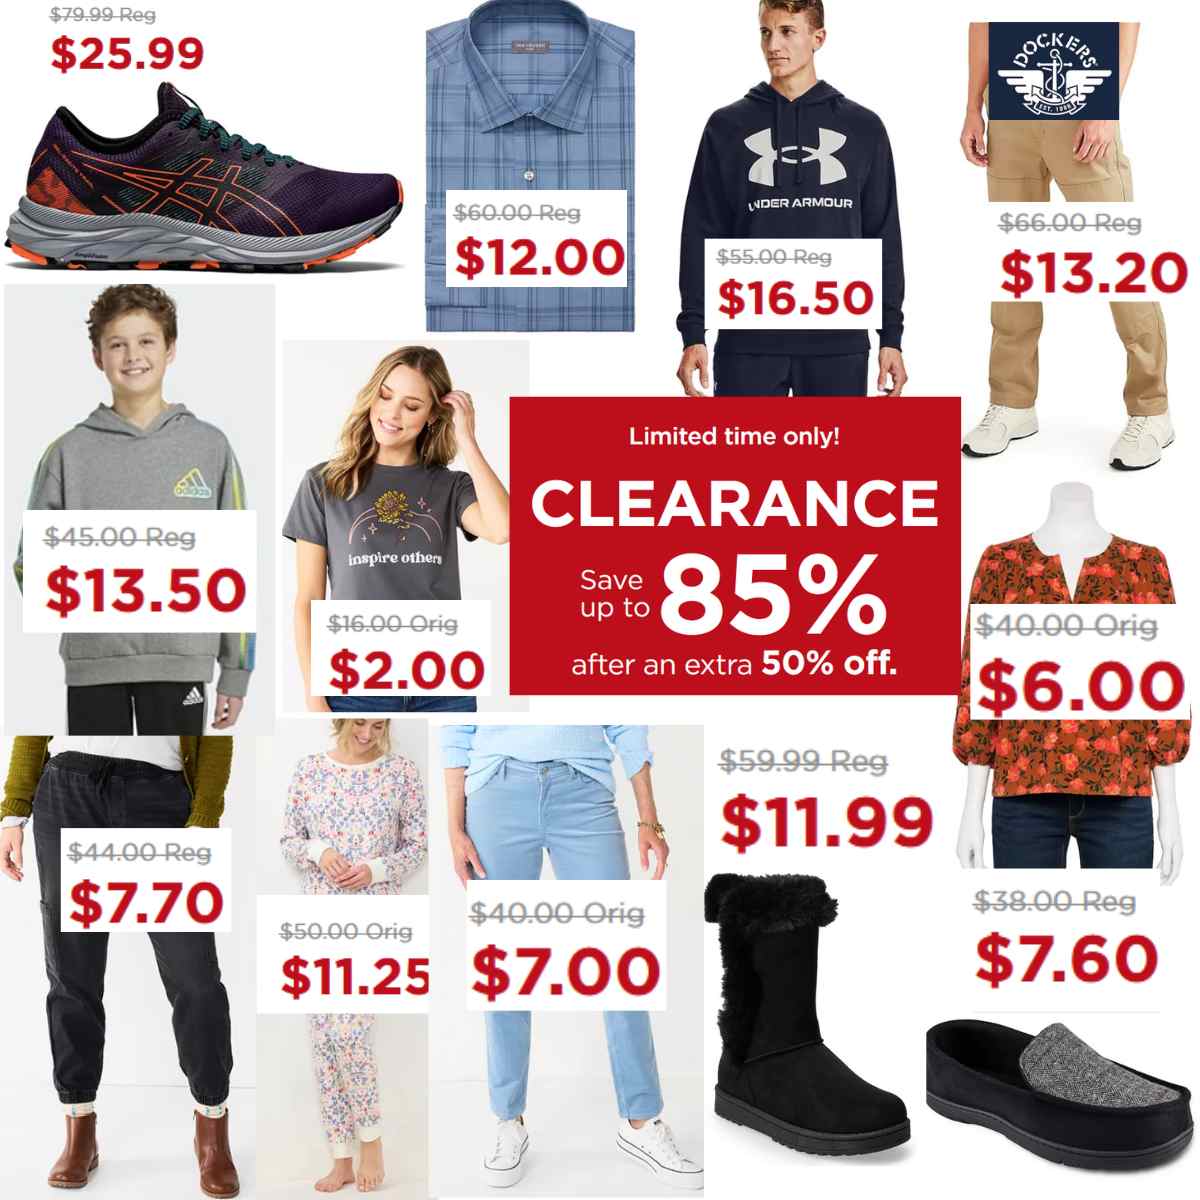 Kohl's Clearance: Save up to 85% off on fall fashion